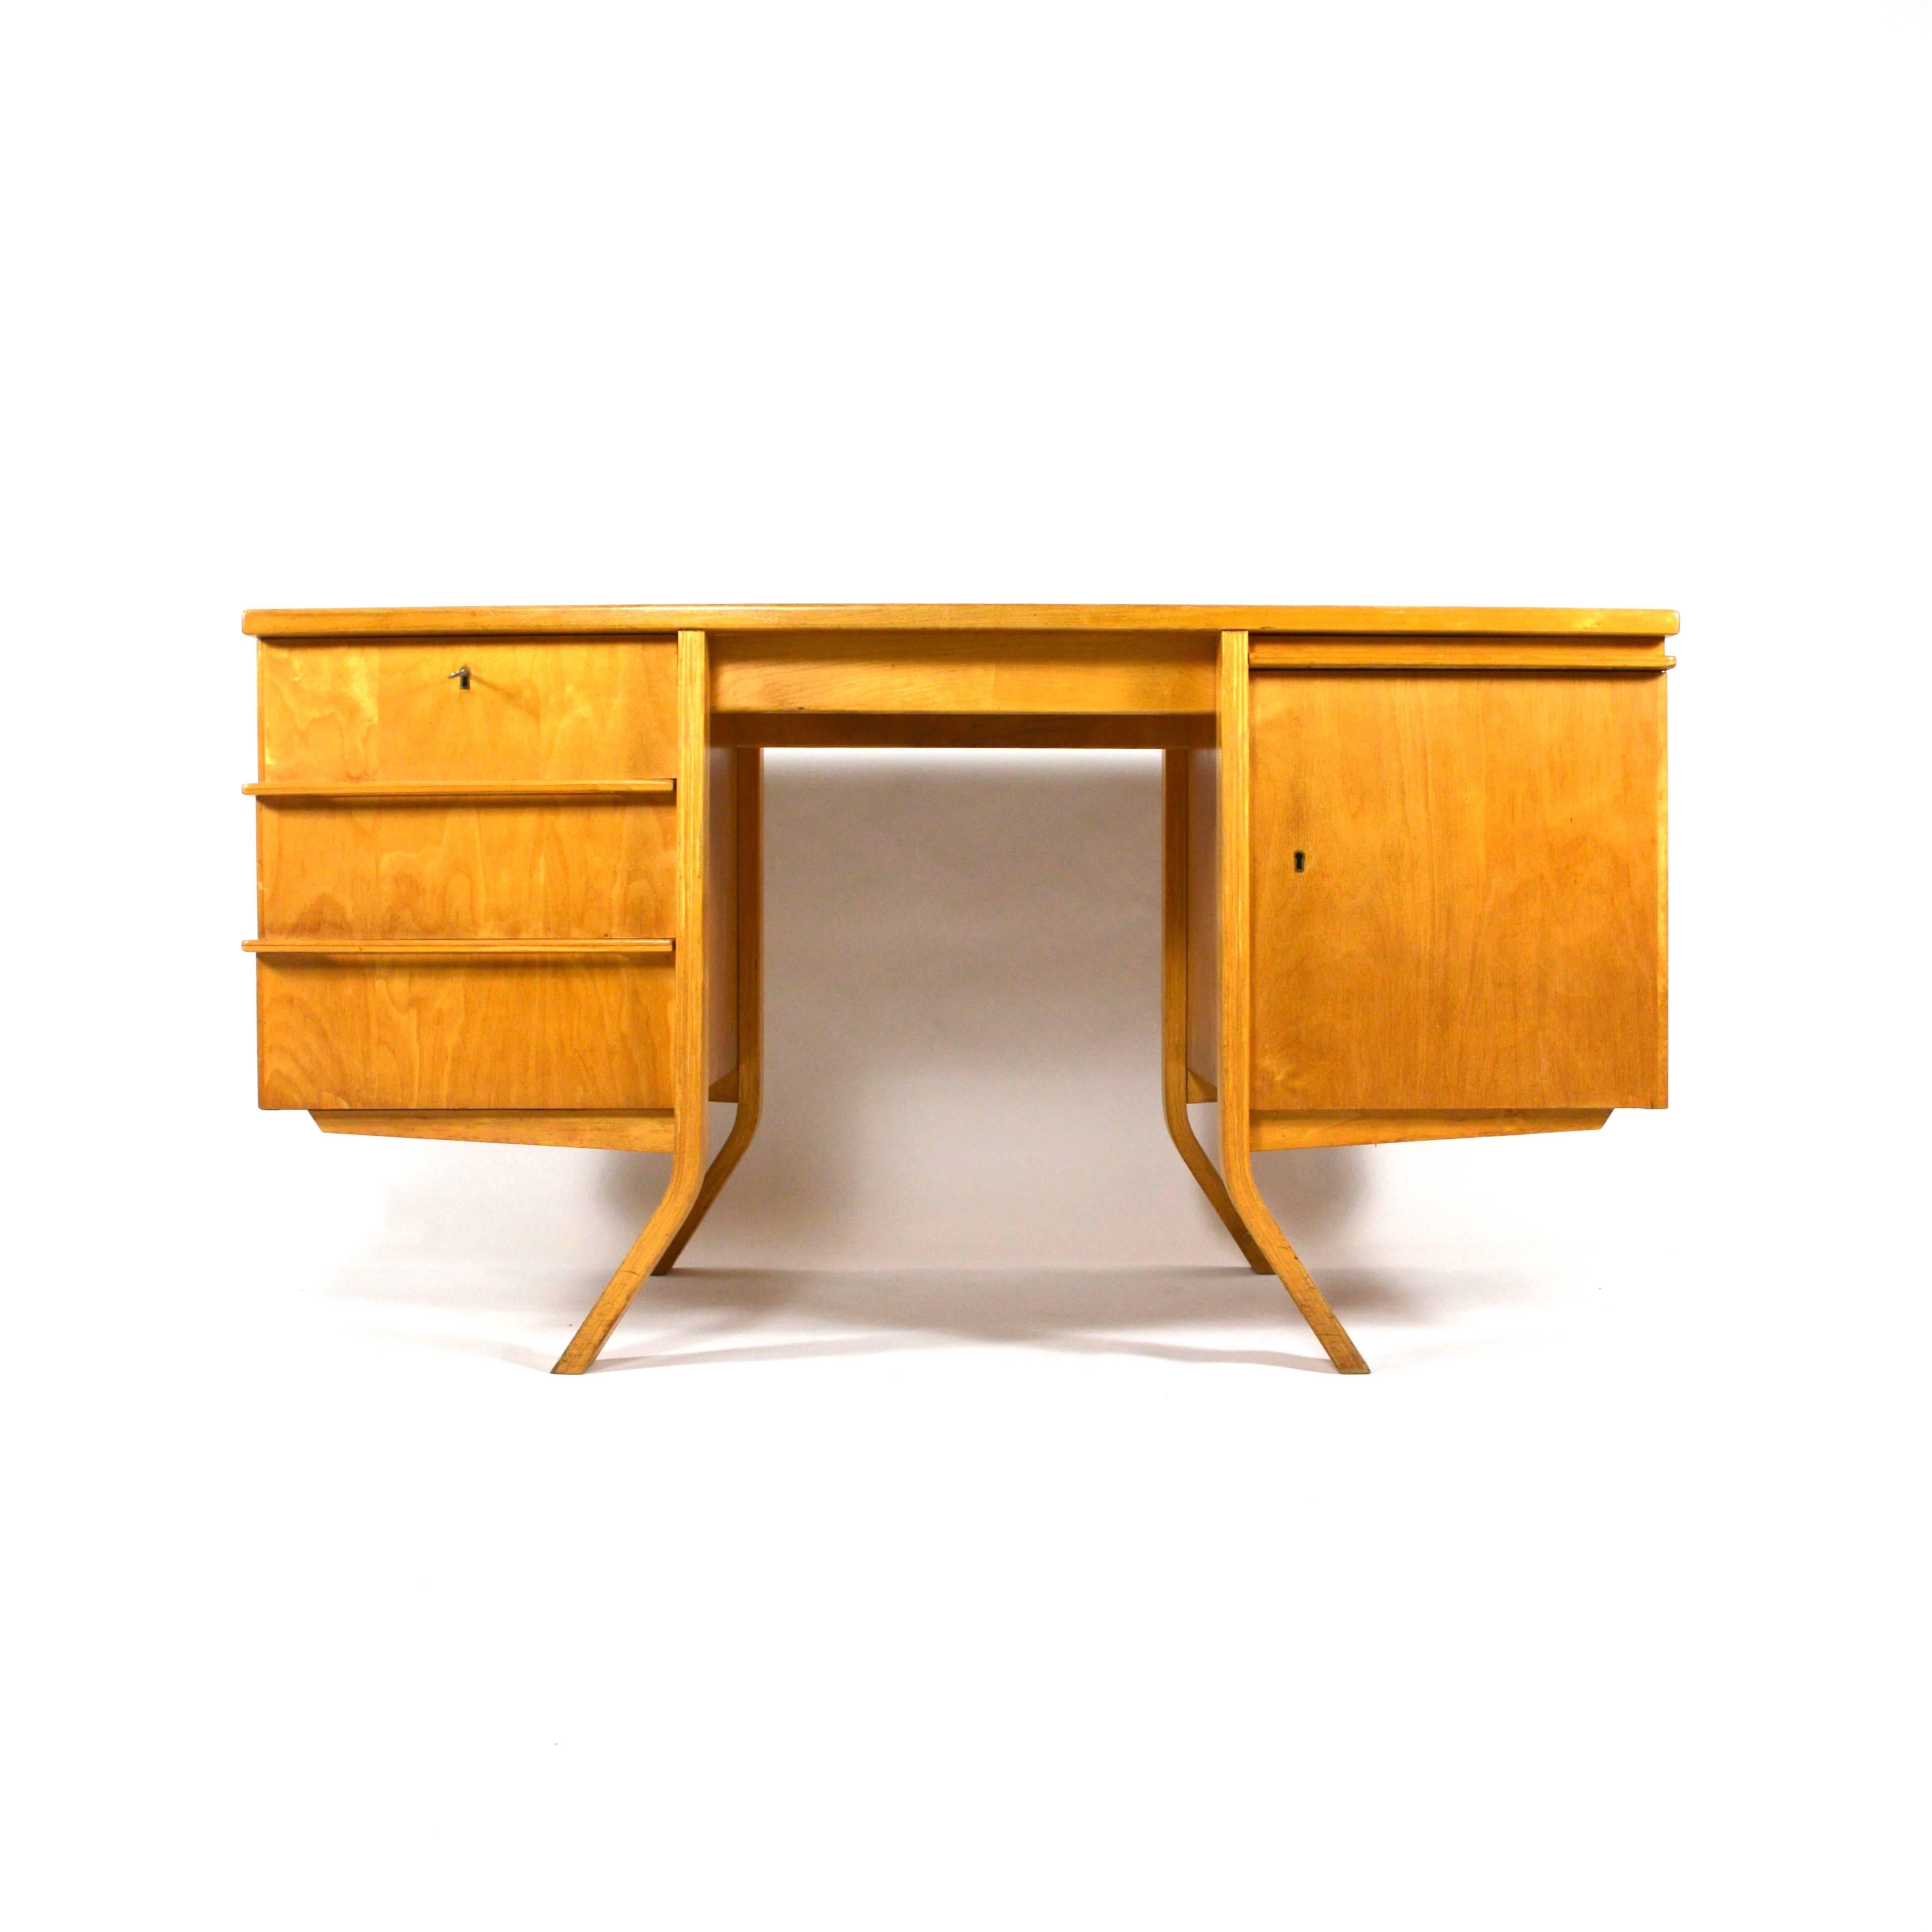 Birch series desk by Cees Braakman for Pastoe, 1950s.
Model EB04.
Made of solid, veneer and plywood birch.

